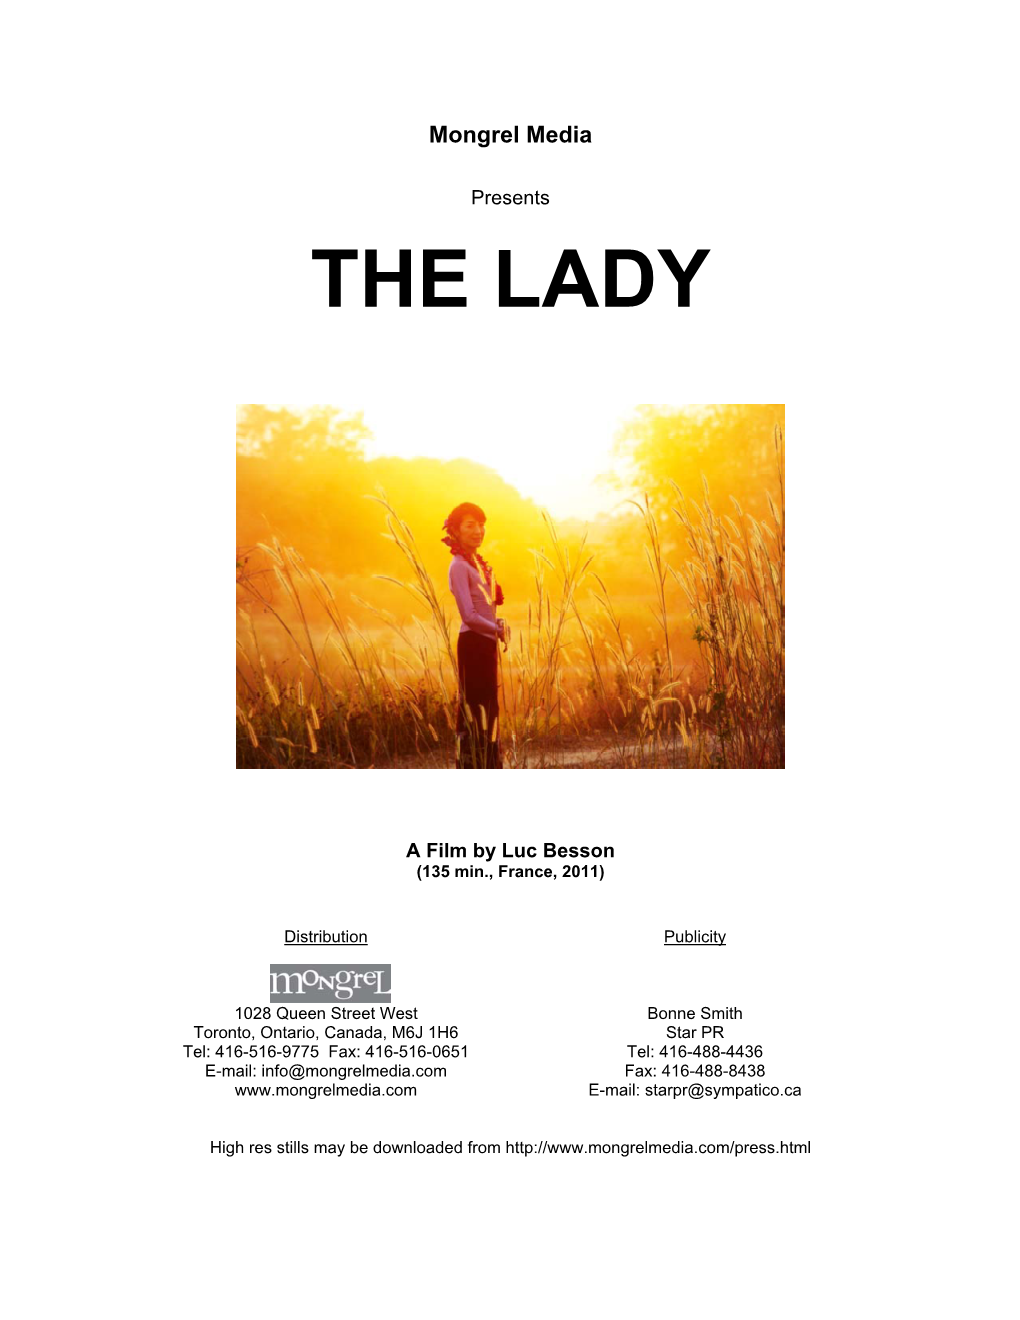 The Lady DP Complet VA Sept 6